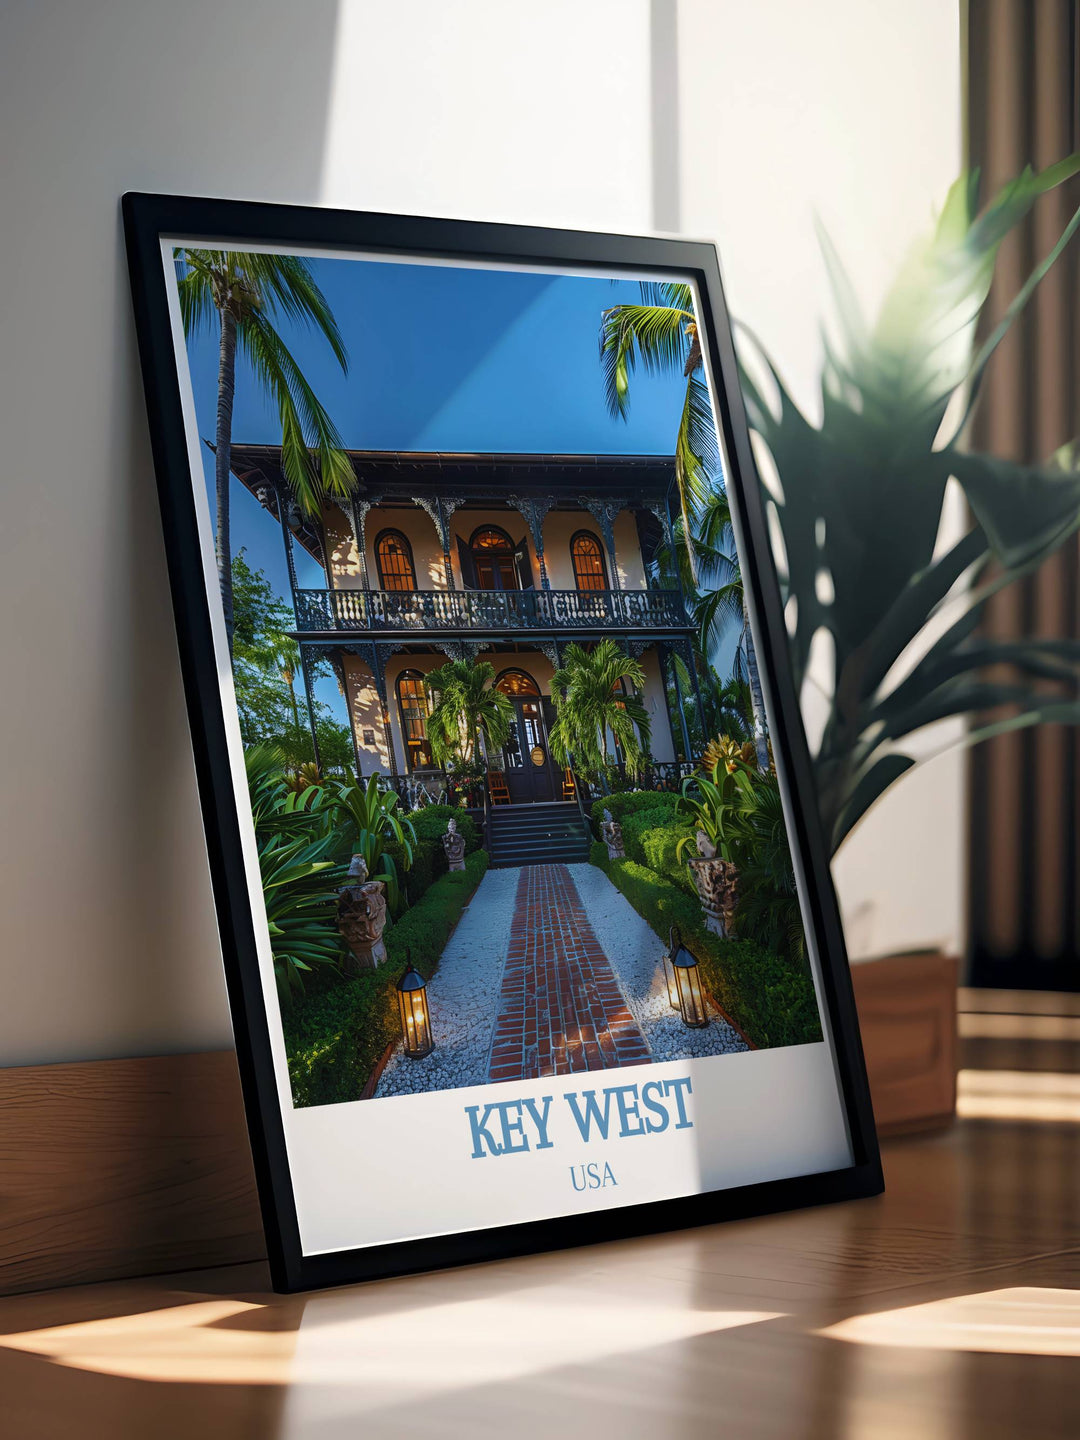 Captivating Ernest Hemingway Home and Museum Travel Poster a beautiful piece of Florida Travel Art that brings Key Wests historical sites into your home decor